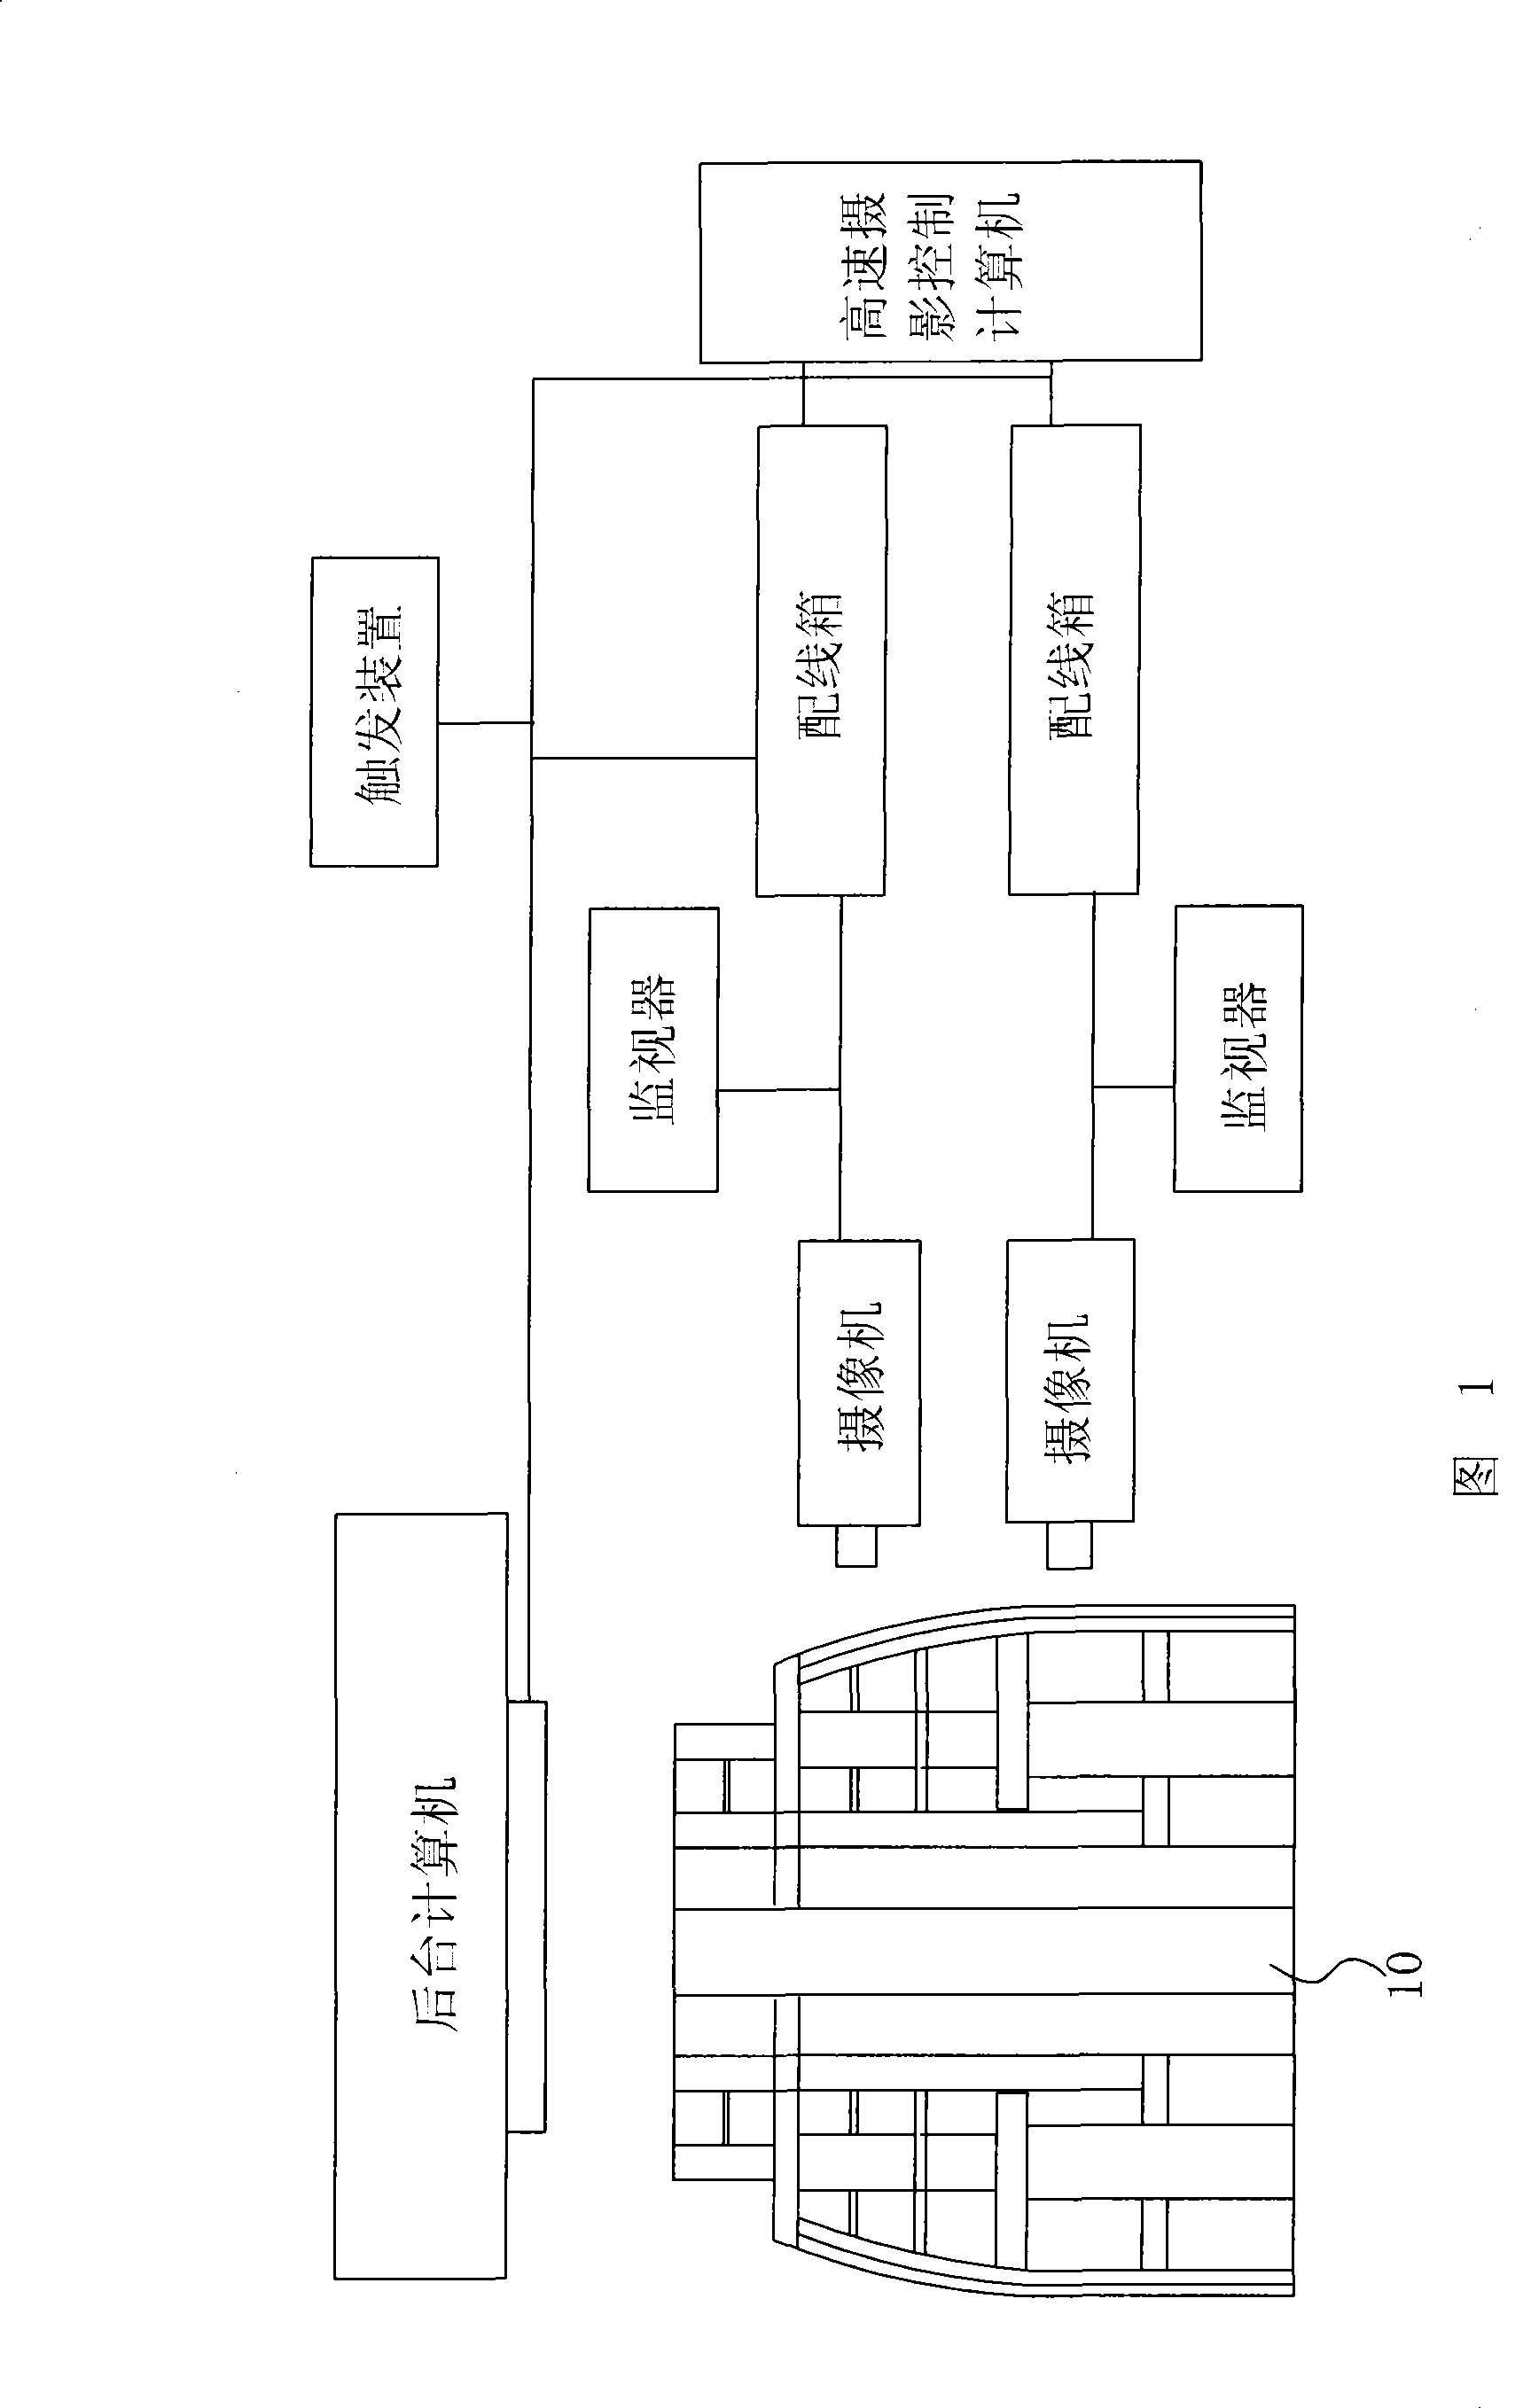 Vehicle component real object collision sequence image analysis method and its analysis system